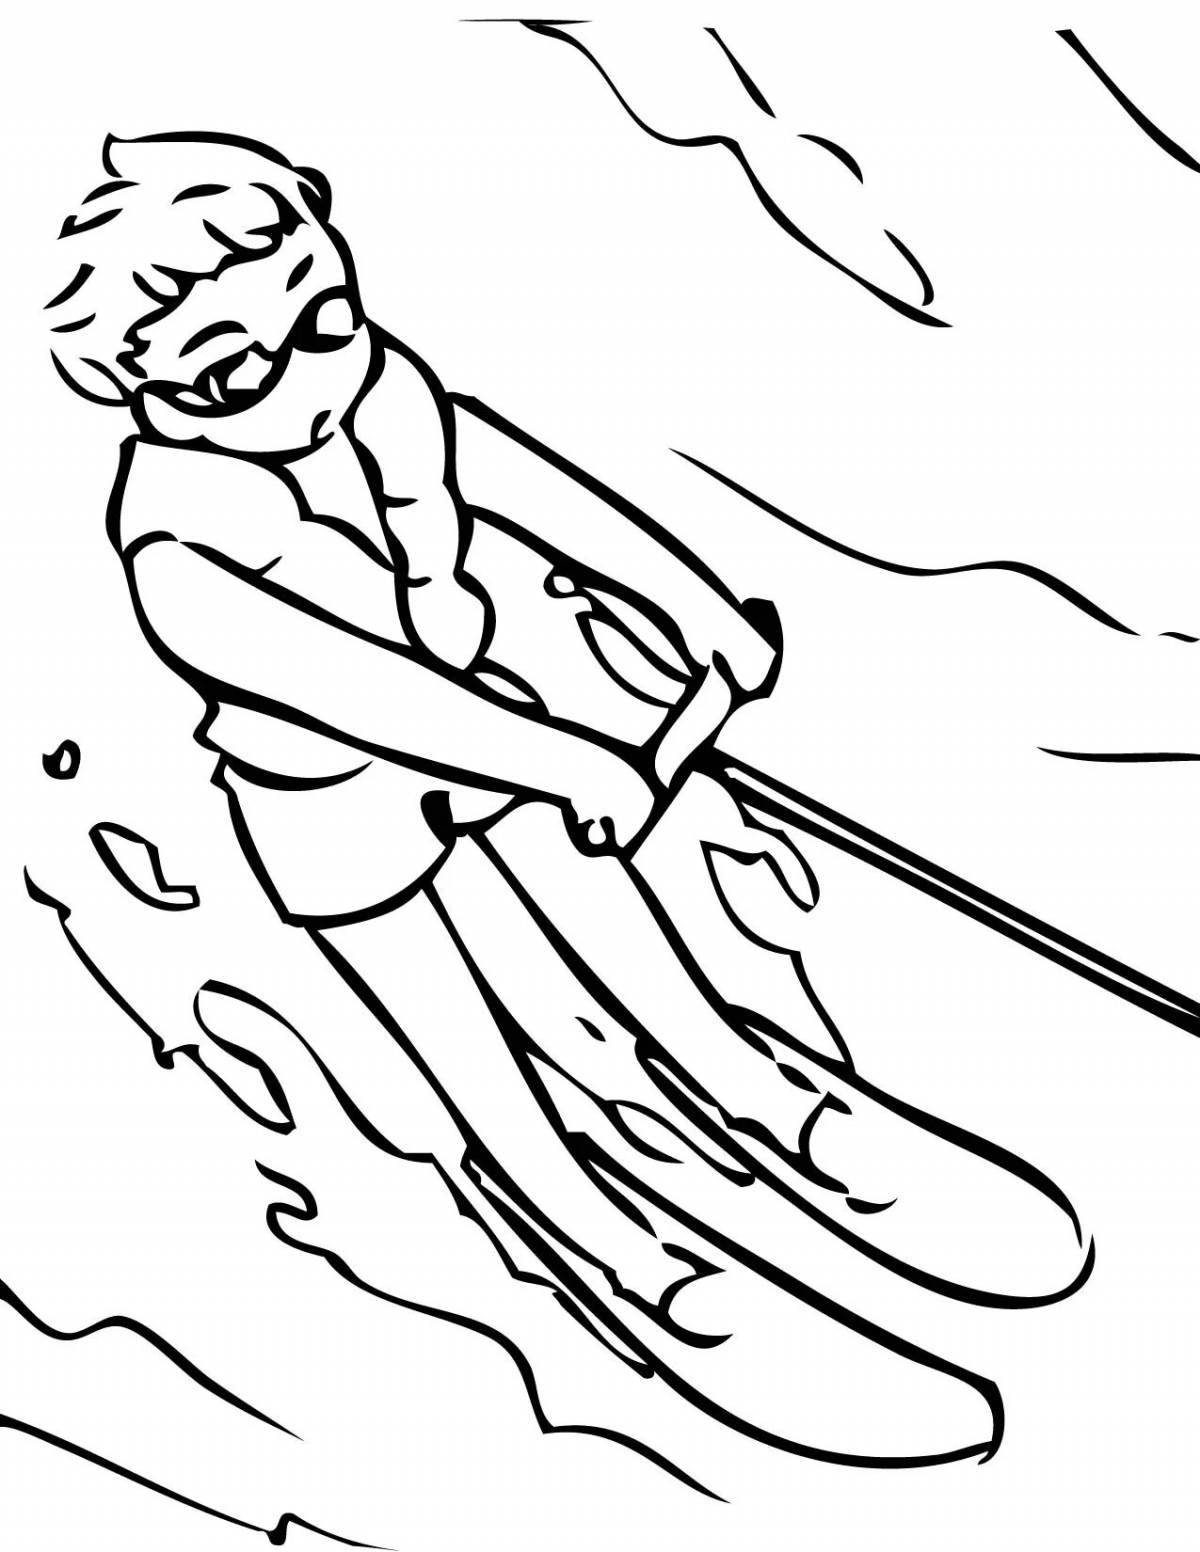 Exotic surf coloring page